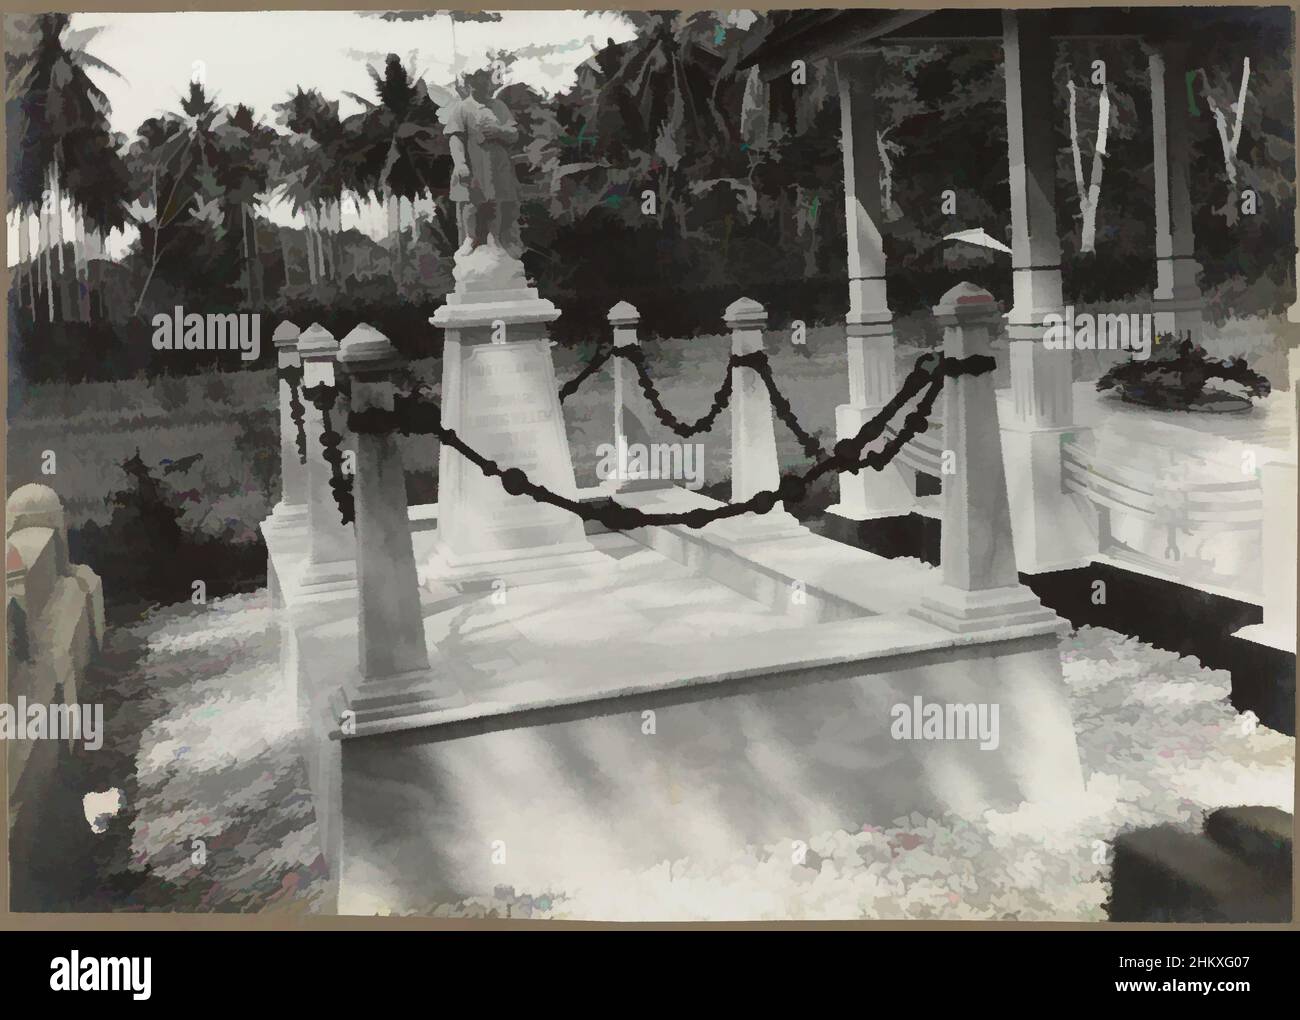 Art inspired by Cemetery with grave of B.L.W. Bertok, A cemetery at Medan with the grave of Bernhard Ludwig Willem Bertok (or Berton). Photo in the photo album of the Dutch architectural and contracting firm Bennink and Riphagen in Medan in the years ca. 1914-1919., Medan, 1917 - 1919, Classic works modernized by Artotop with a splash of modernity. Shapes, color and value, eye-catching visual impact on art. Emotions through freedom of artworks in a contemporary way. A timeless message pursuing a wildly creative new direction. Artists turning to the digital medium and creating the Artotop NFT Stock Photo